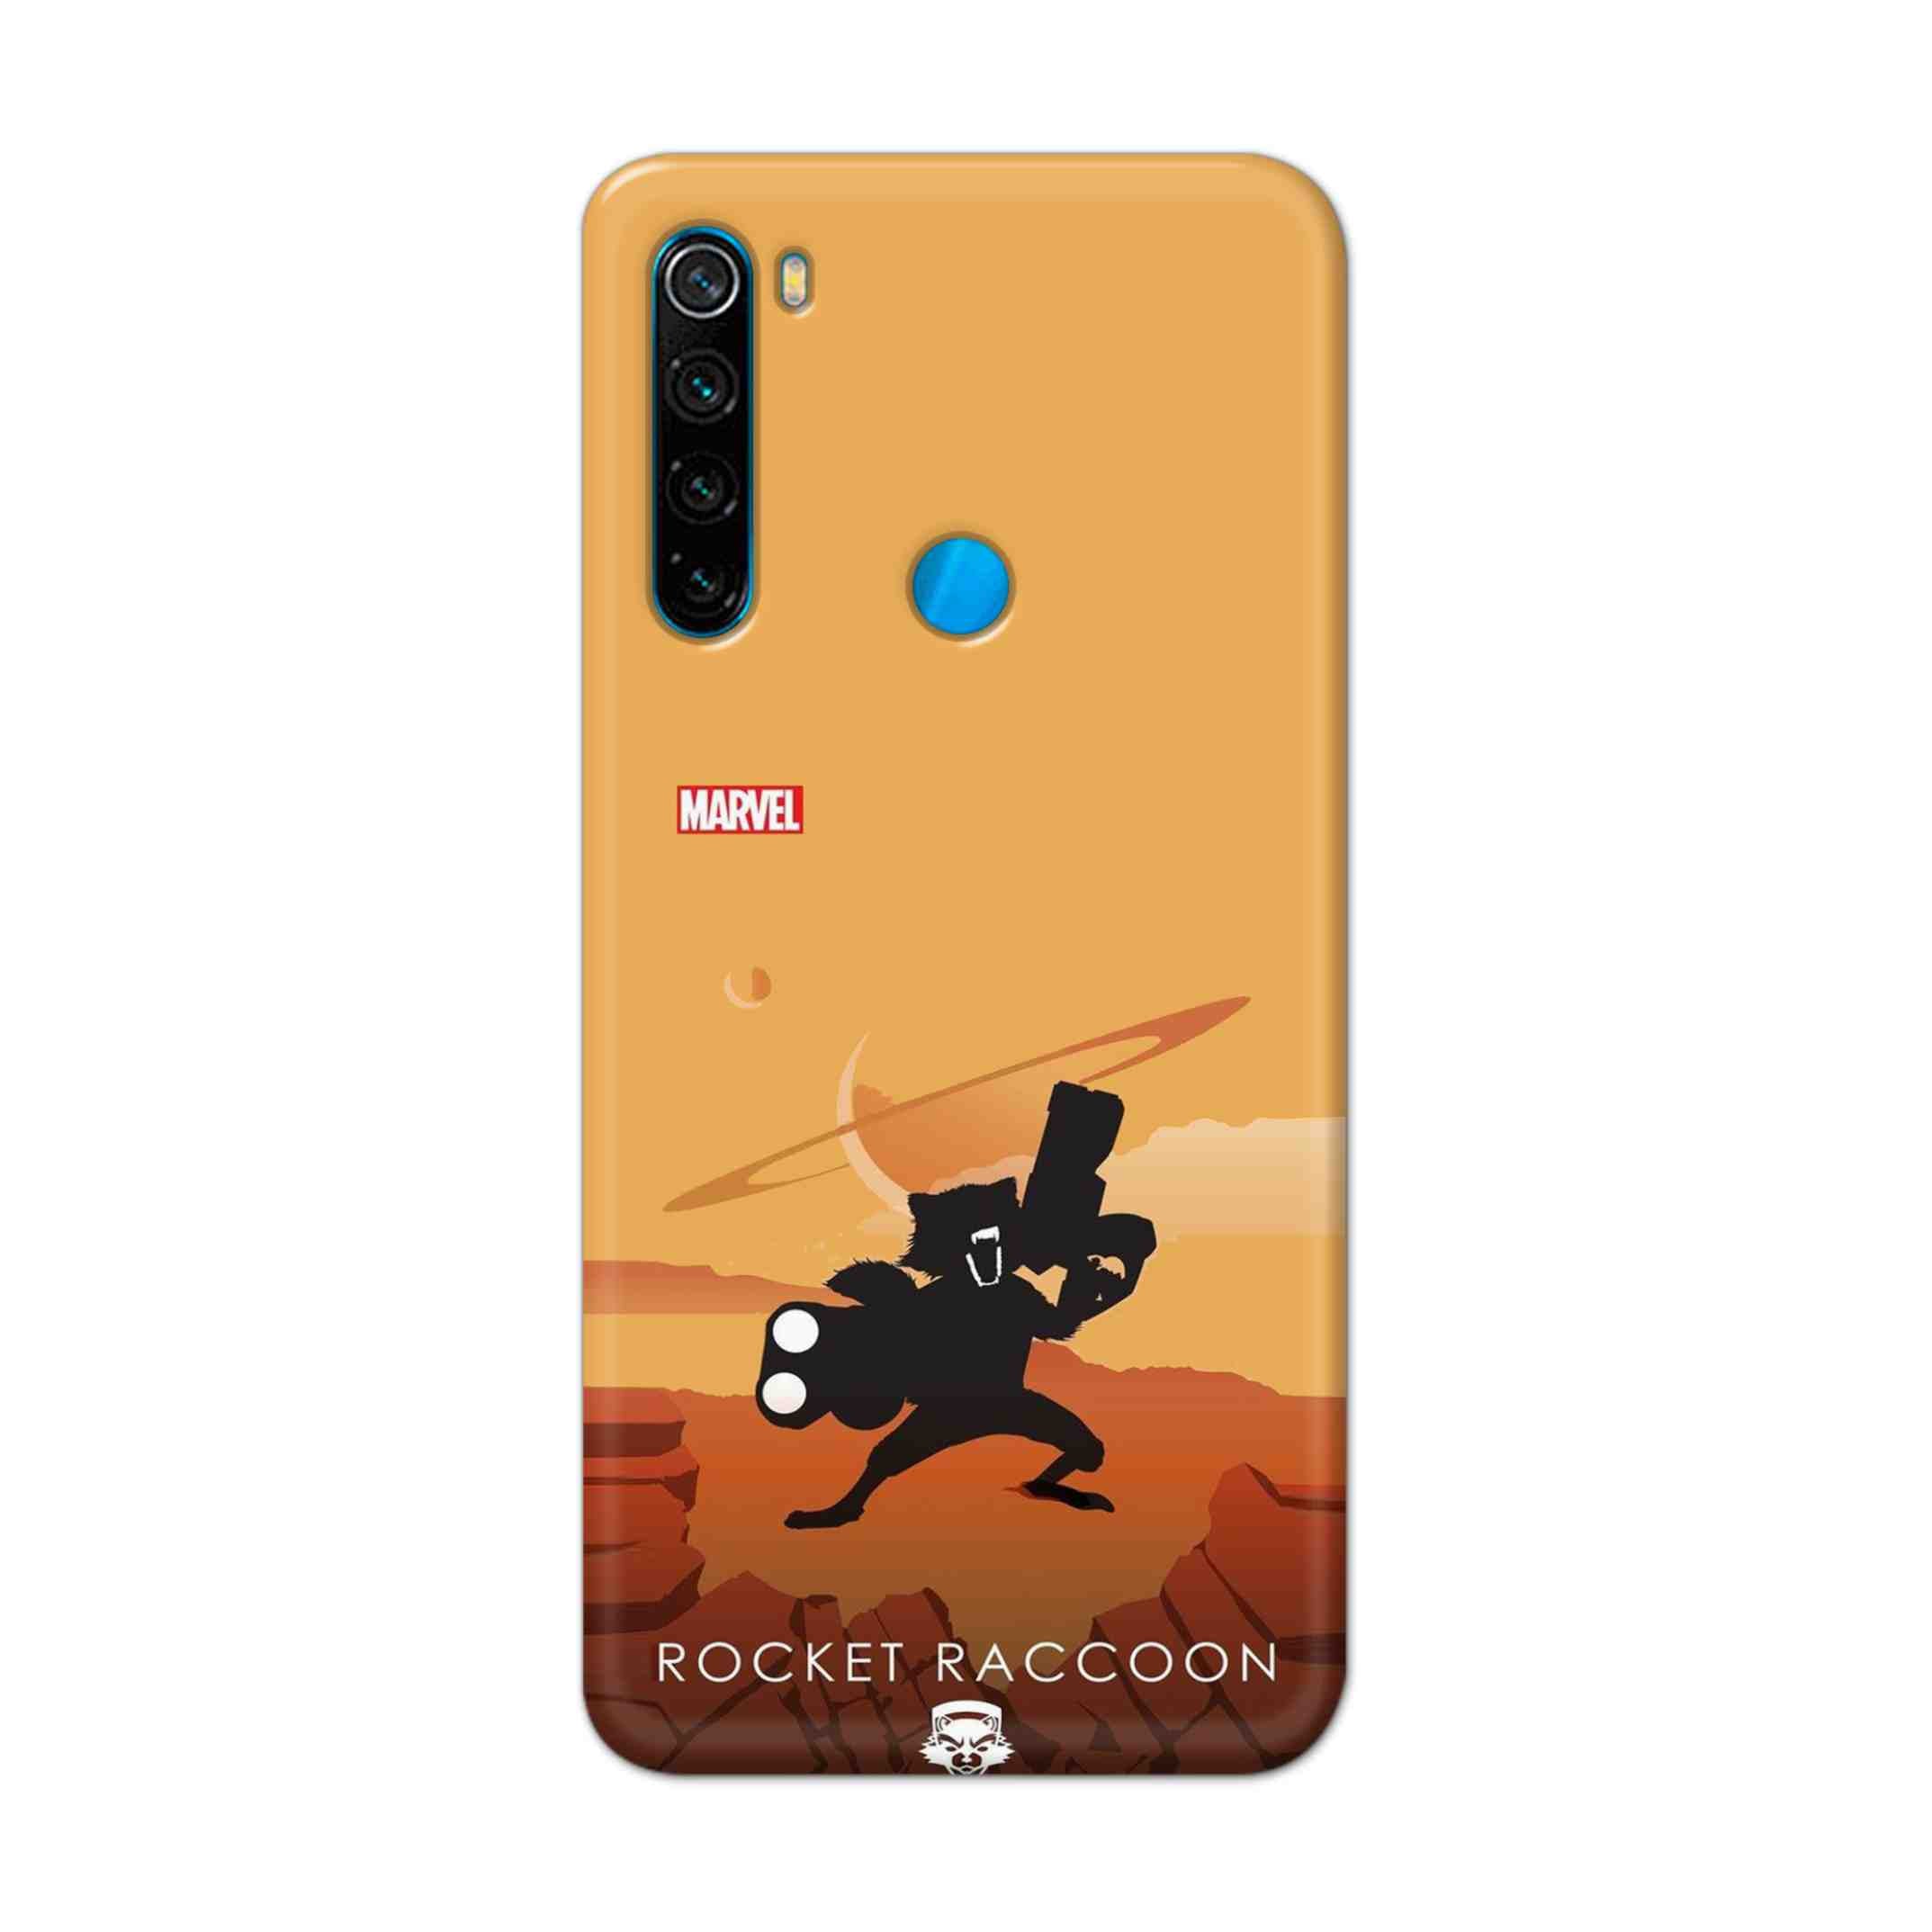 Buy Rocket Raccoon Hard Back Mobile Phone Case Cover For Xiaomi Redmi Note 8 Online